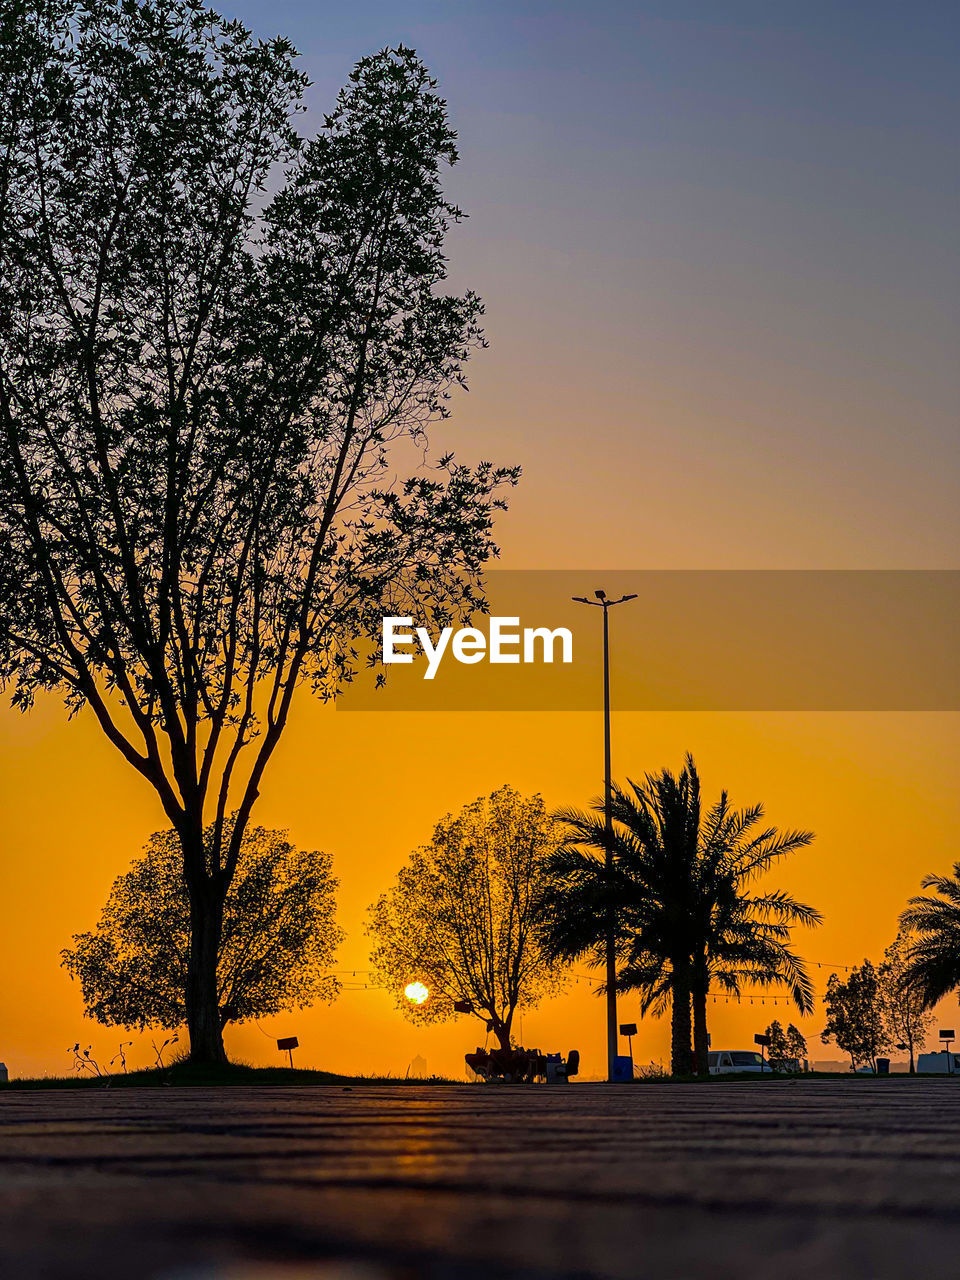 tree, sunset, sky, plant, nature, beauty in nature, dawn, silhouette, evening, scenics - nature, orange color, tranquility, no people, horizon, tranquil scene, land, environment, landscape, outdoors, afterglow, sunlight, travel destinations, sun, palm tree, yellow, water, tropical climate, idyllic